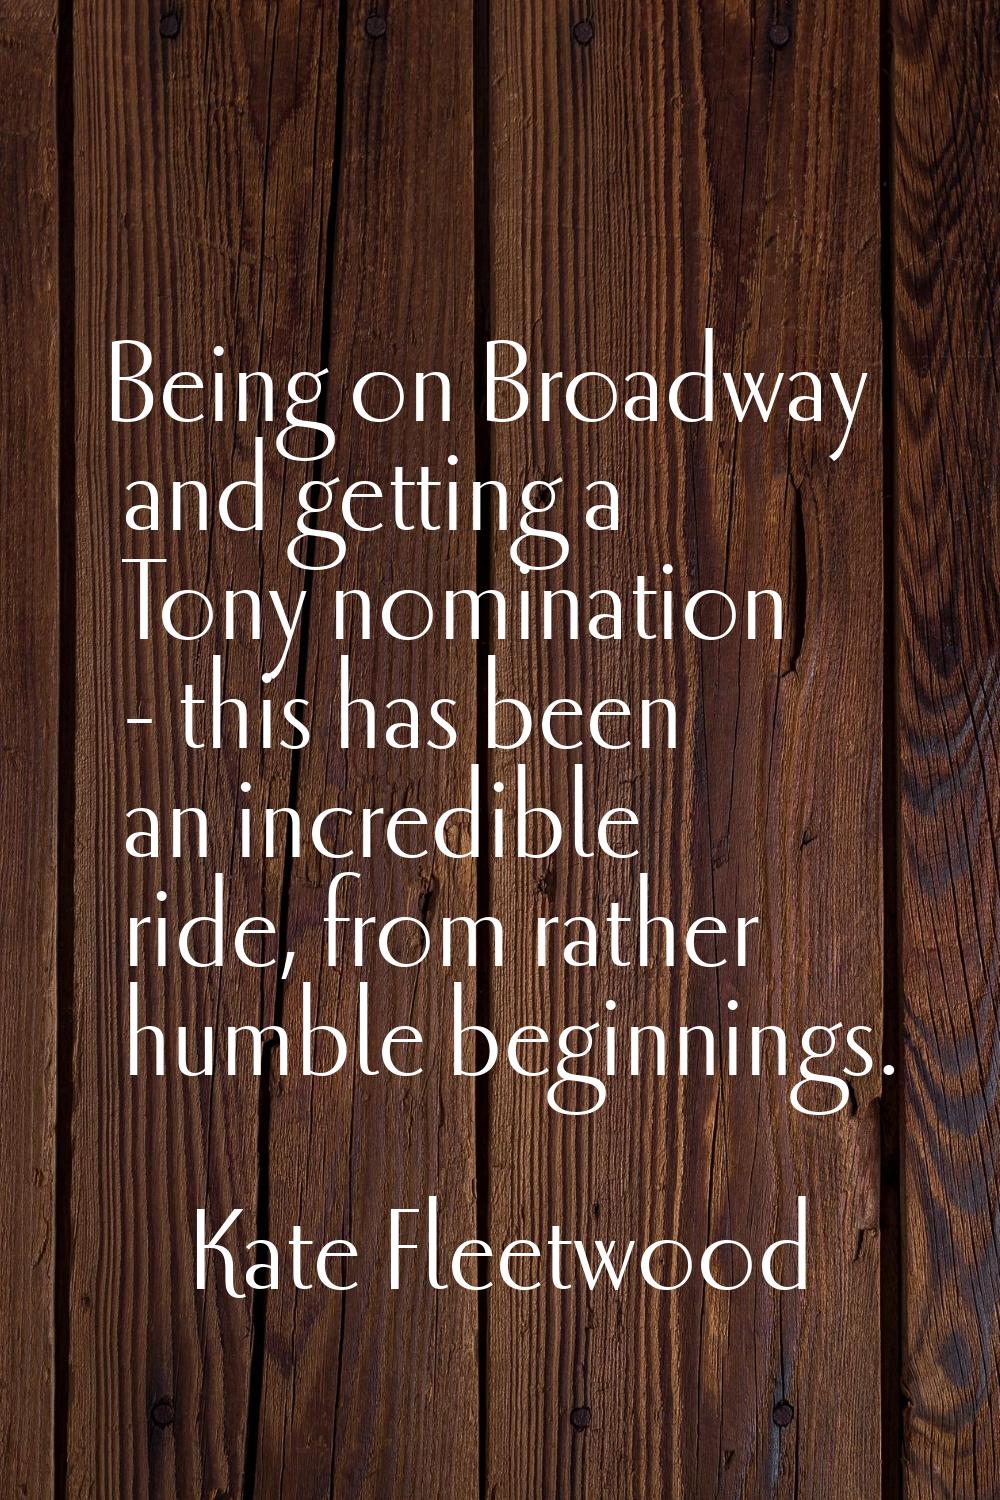 Being on Broadway and getting a Tony nomination - this has been an incredible ride, from rather hum